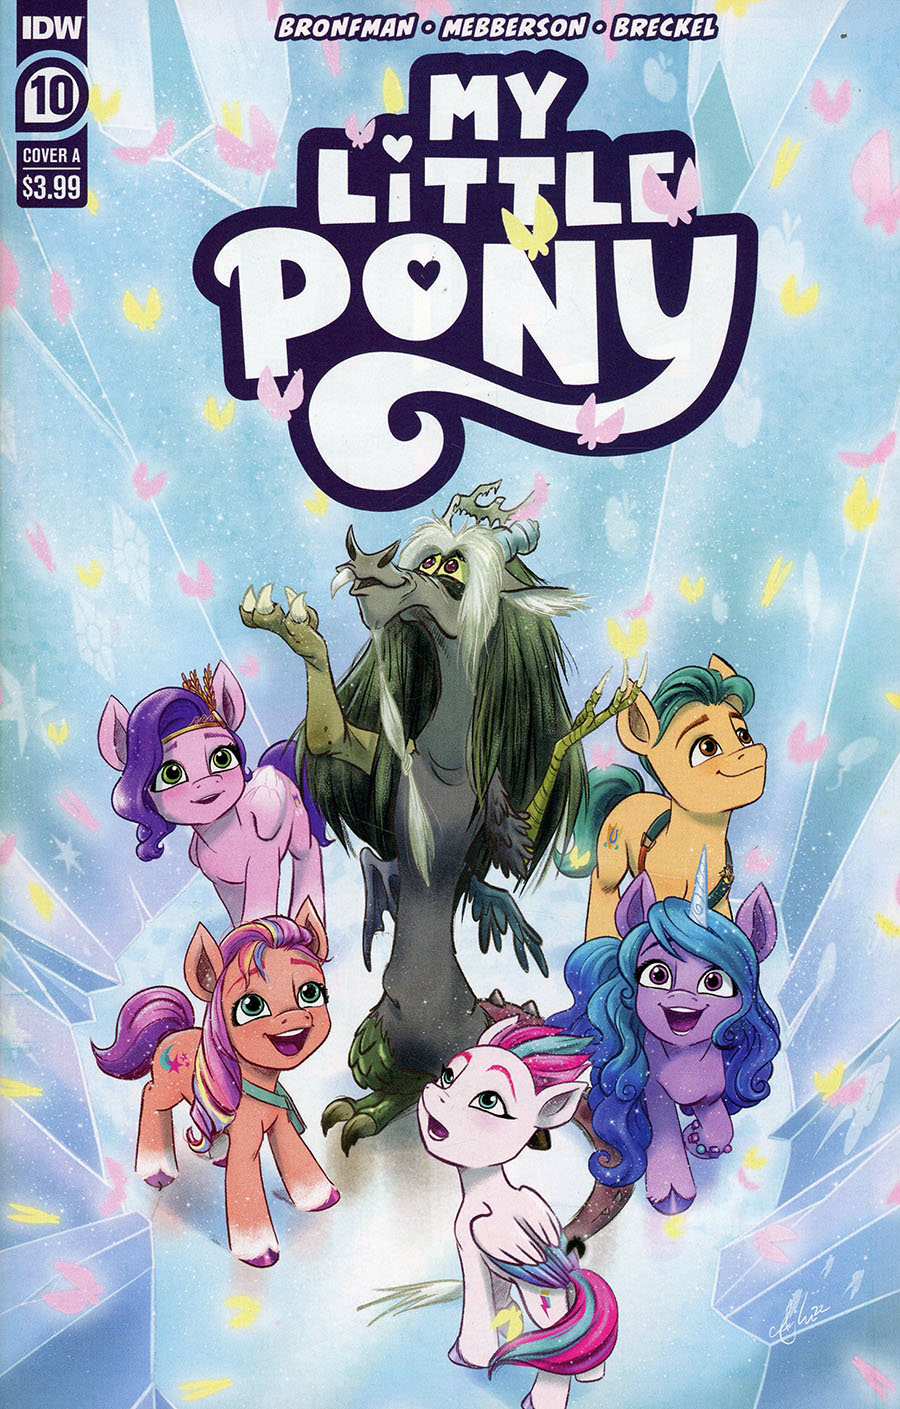 My Little Pony #10 Cover A Regular Amy Mebberson Cover